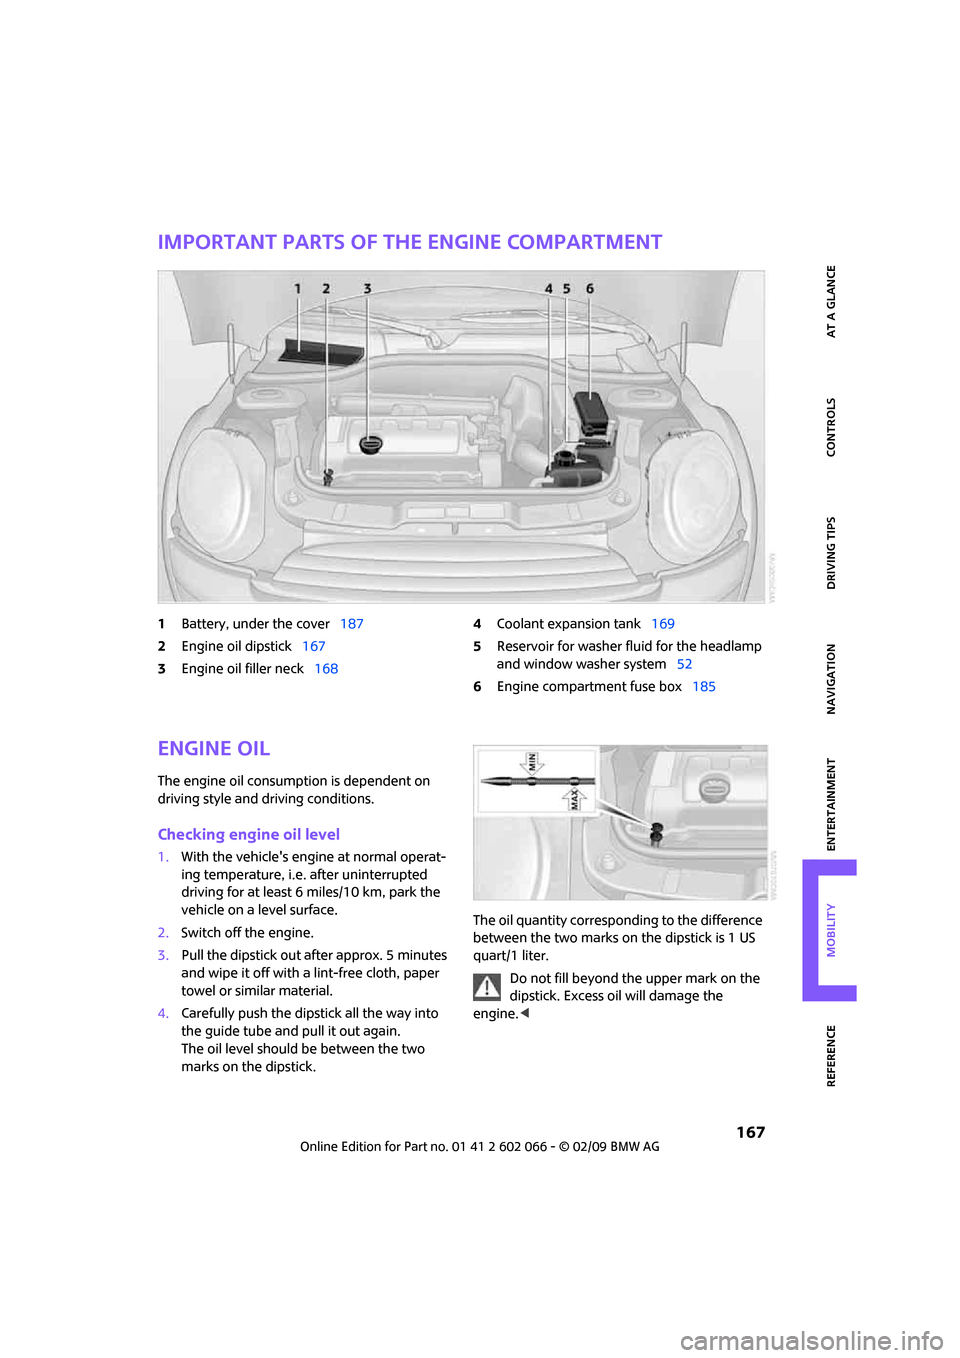 MINI Clubman 2009  Owners Manual (Mini Connected) MOBILITYAT A GLANCE CONTROLS DRIVING TIPS ENTERTAINMENT
 167
NAVIGATION REFERENCE
Important parts of the engine compartment
1Battery, under the cover187
2Engine oil dipstick167
3Engine oil filler neck